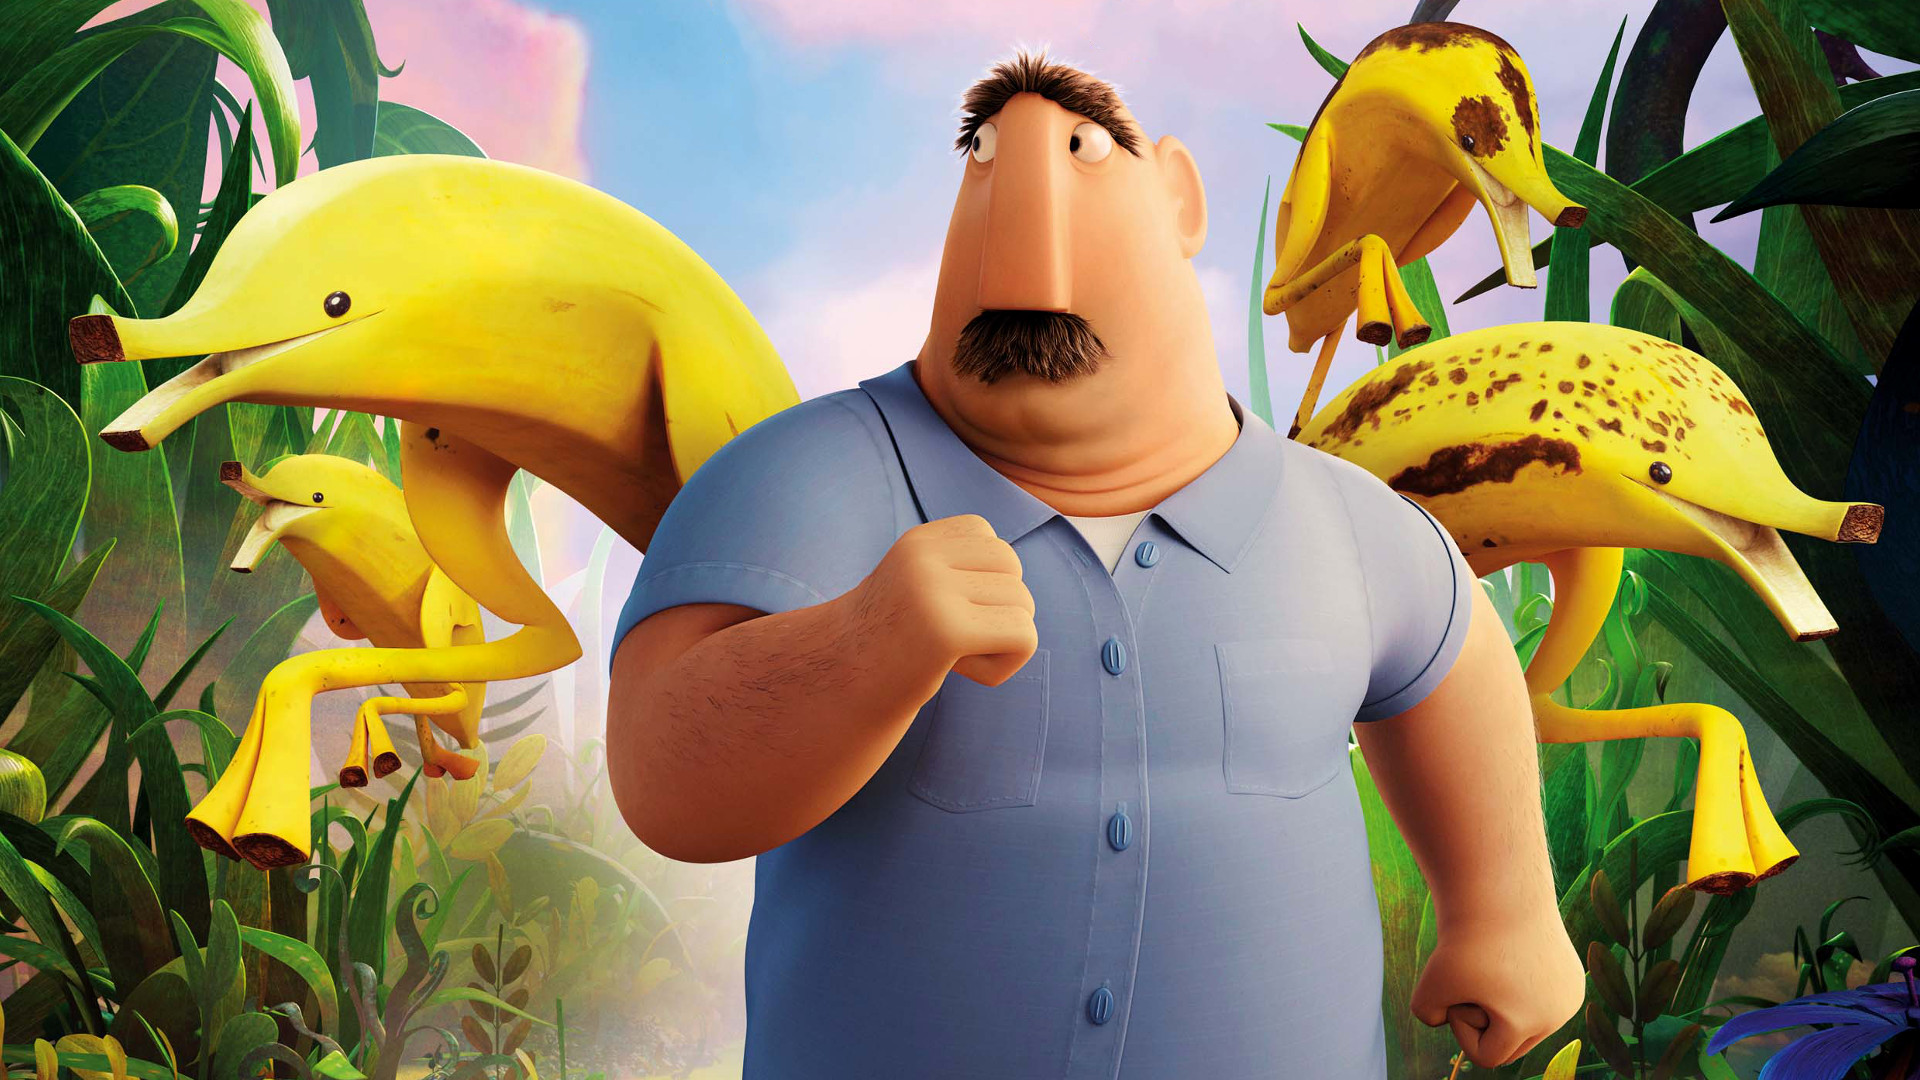 movie, cloudy with a chance of meatballs 2